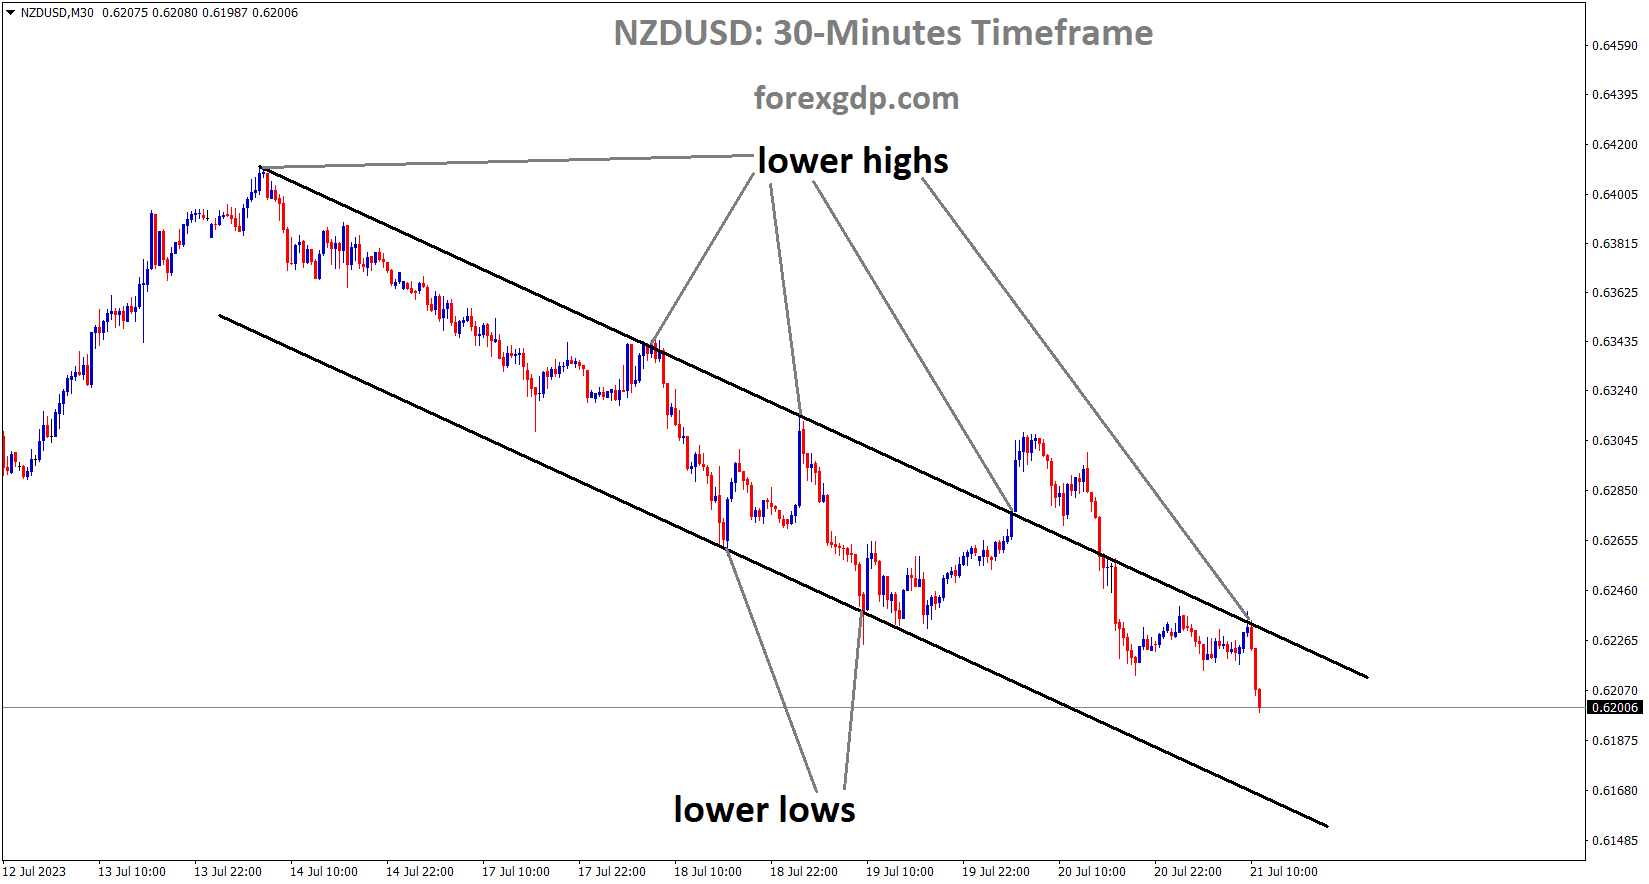 NZDUSD is moving in the Descending channel and the market has fallen from the lower high area of the channel 1